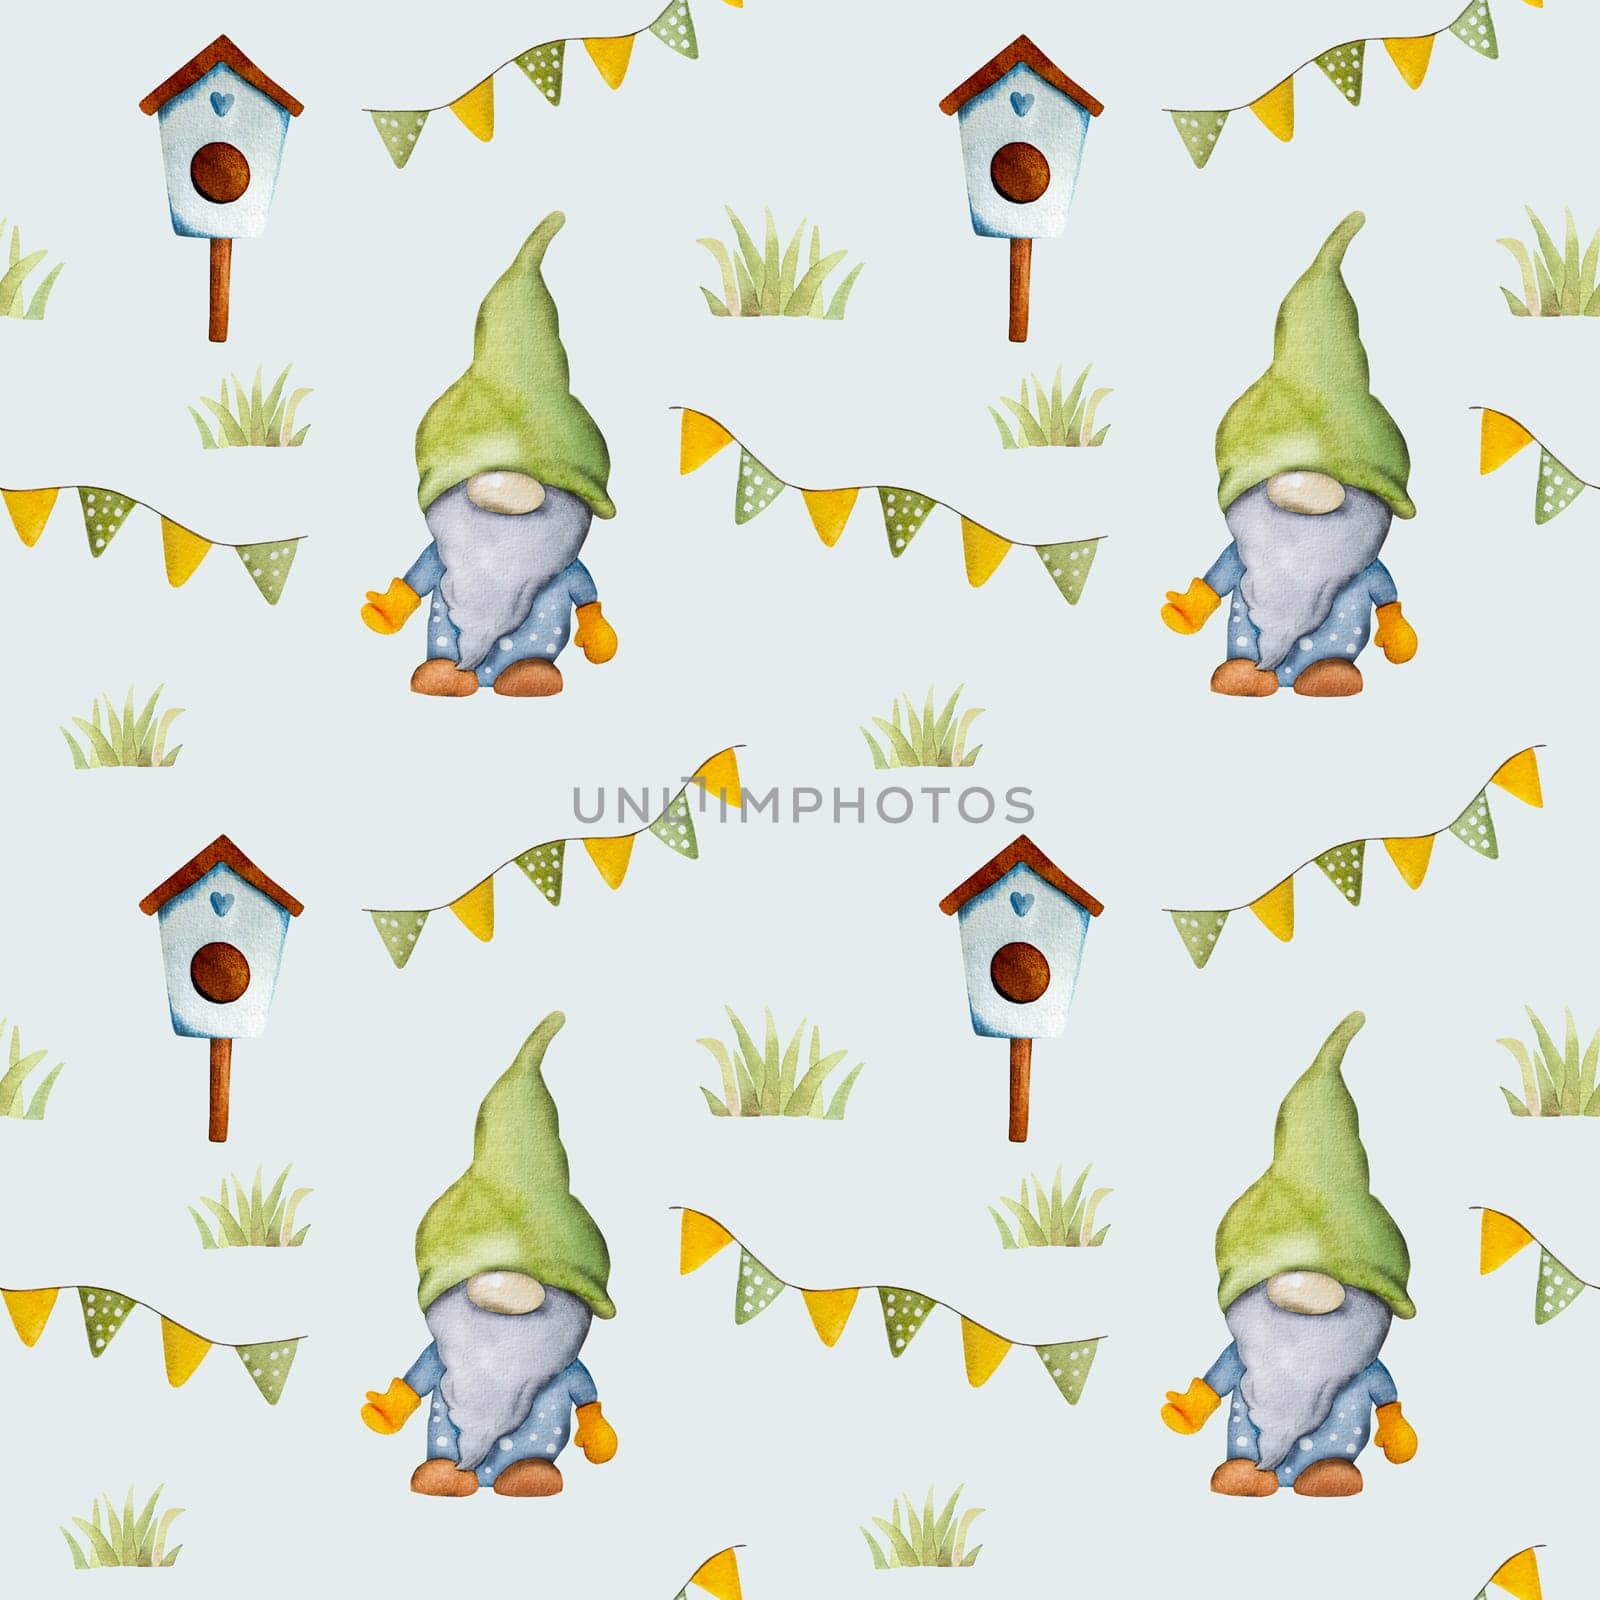 Garden dwarf with bird house in green grass watercolor cartoon painting seamless pattern. Cute gnome aquarelle drawing